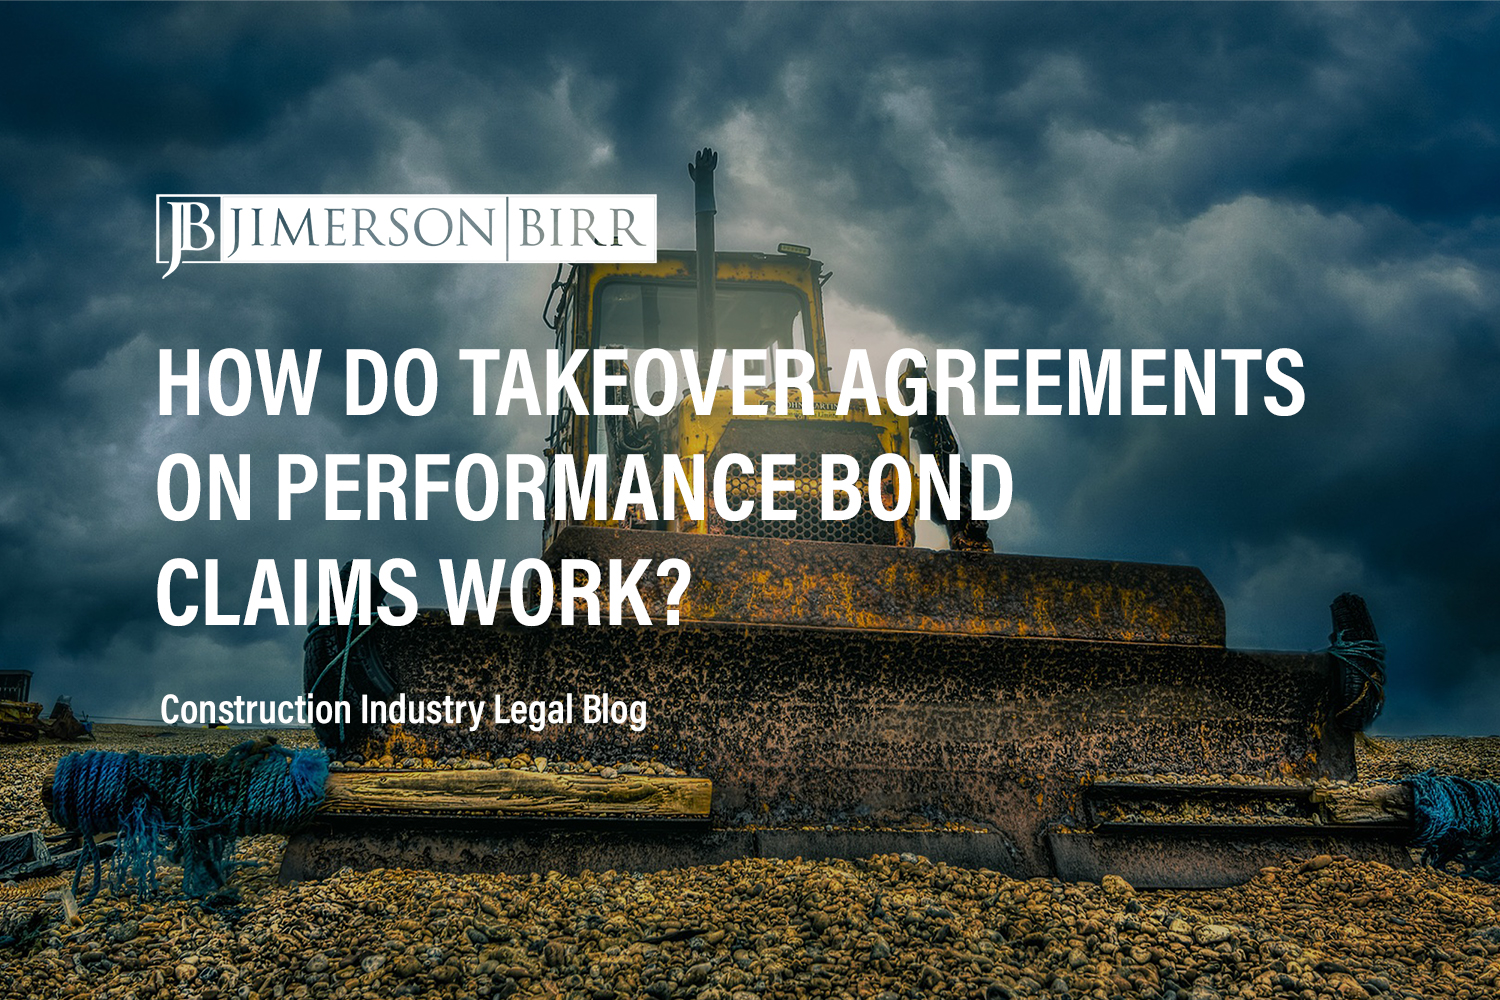 Takeover Agreements on Performance Bond Claims: What Are They and How Do They Work?